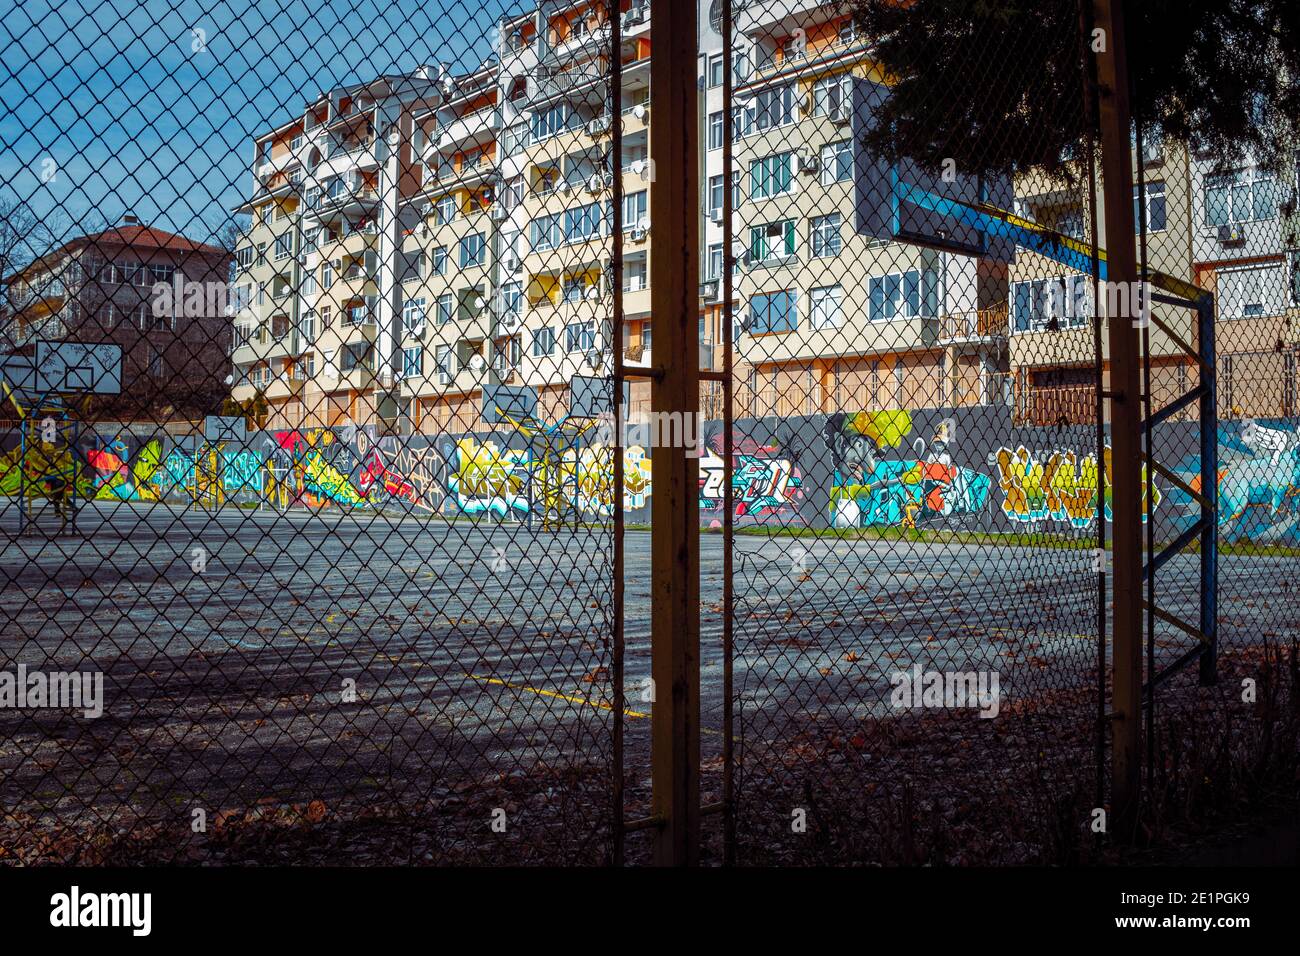 Looking through rusty fence into deserted urban playground area in city of Veliko Tarnovo with street art painted and decorating walls. Stock Photo